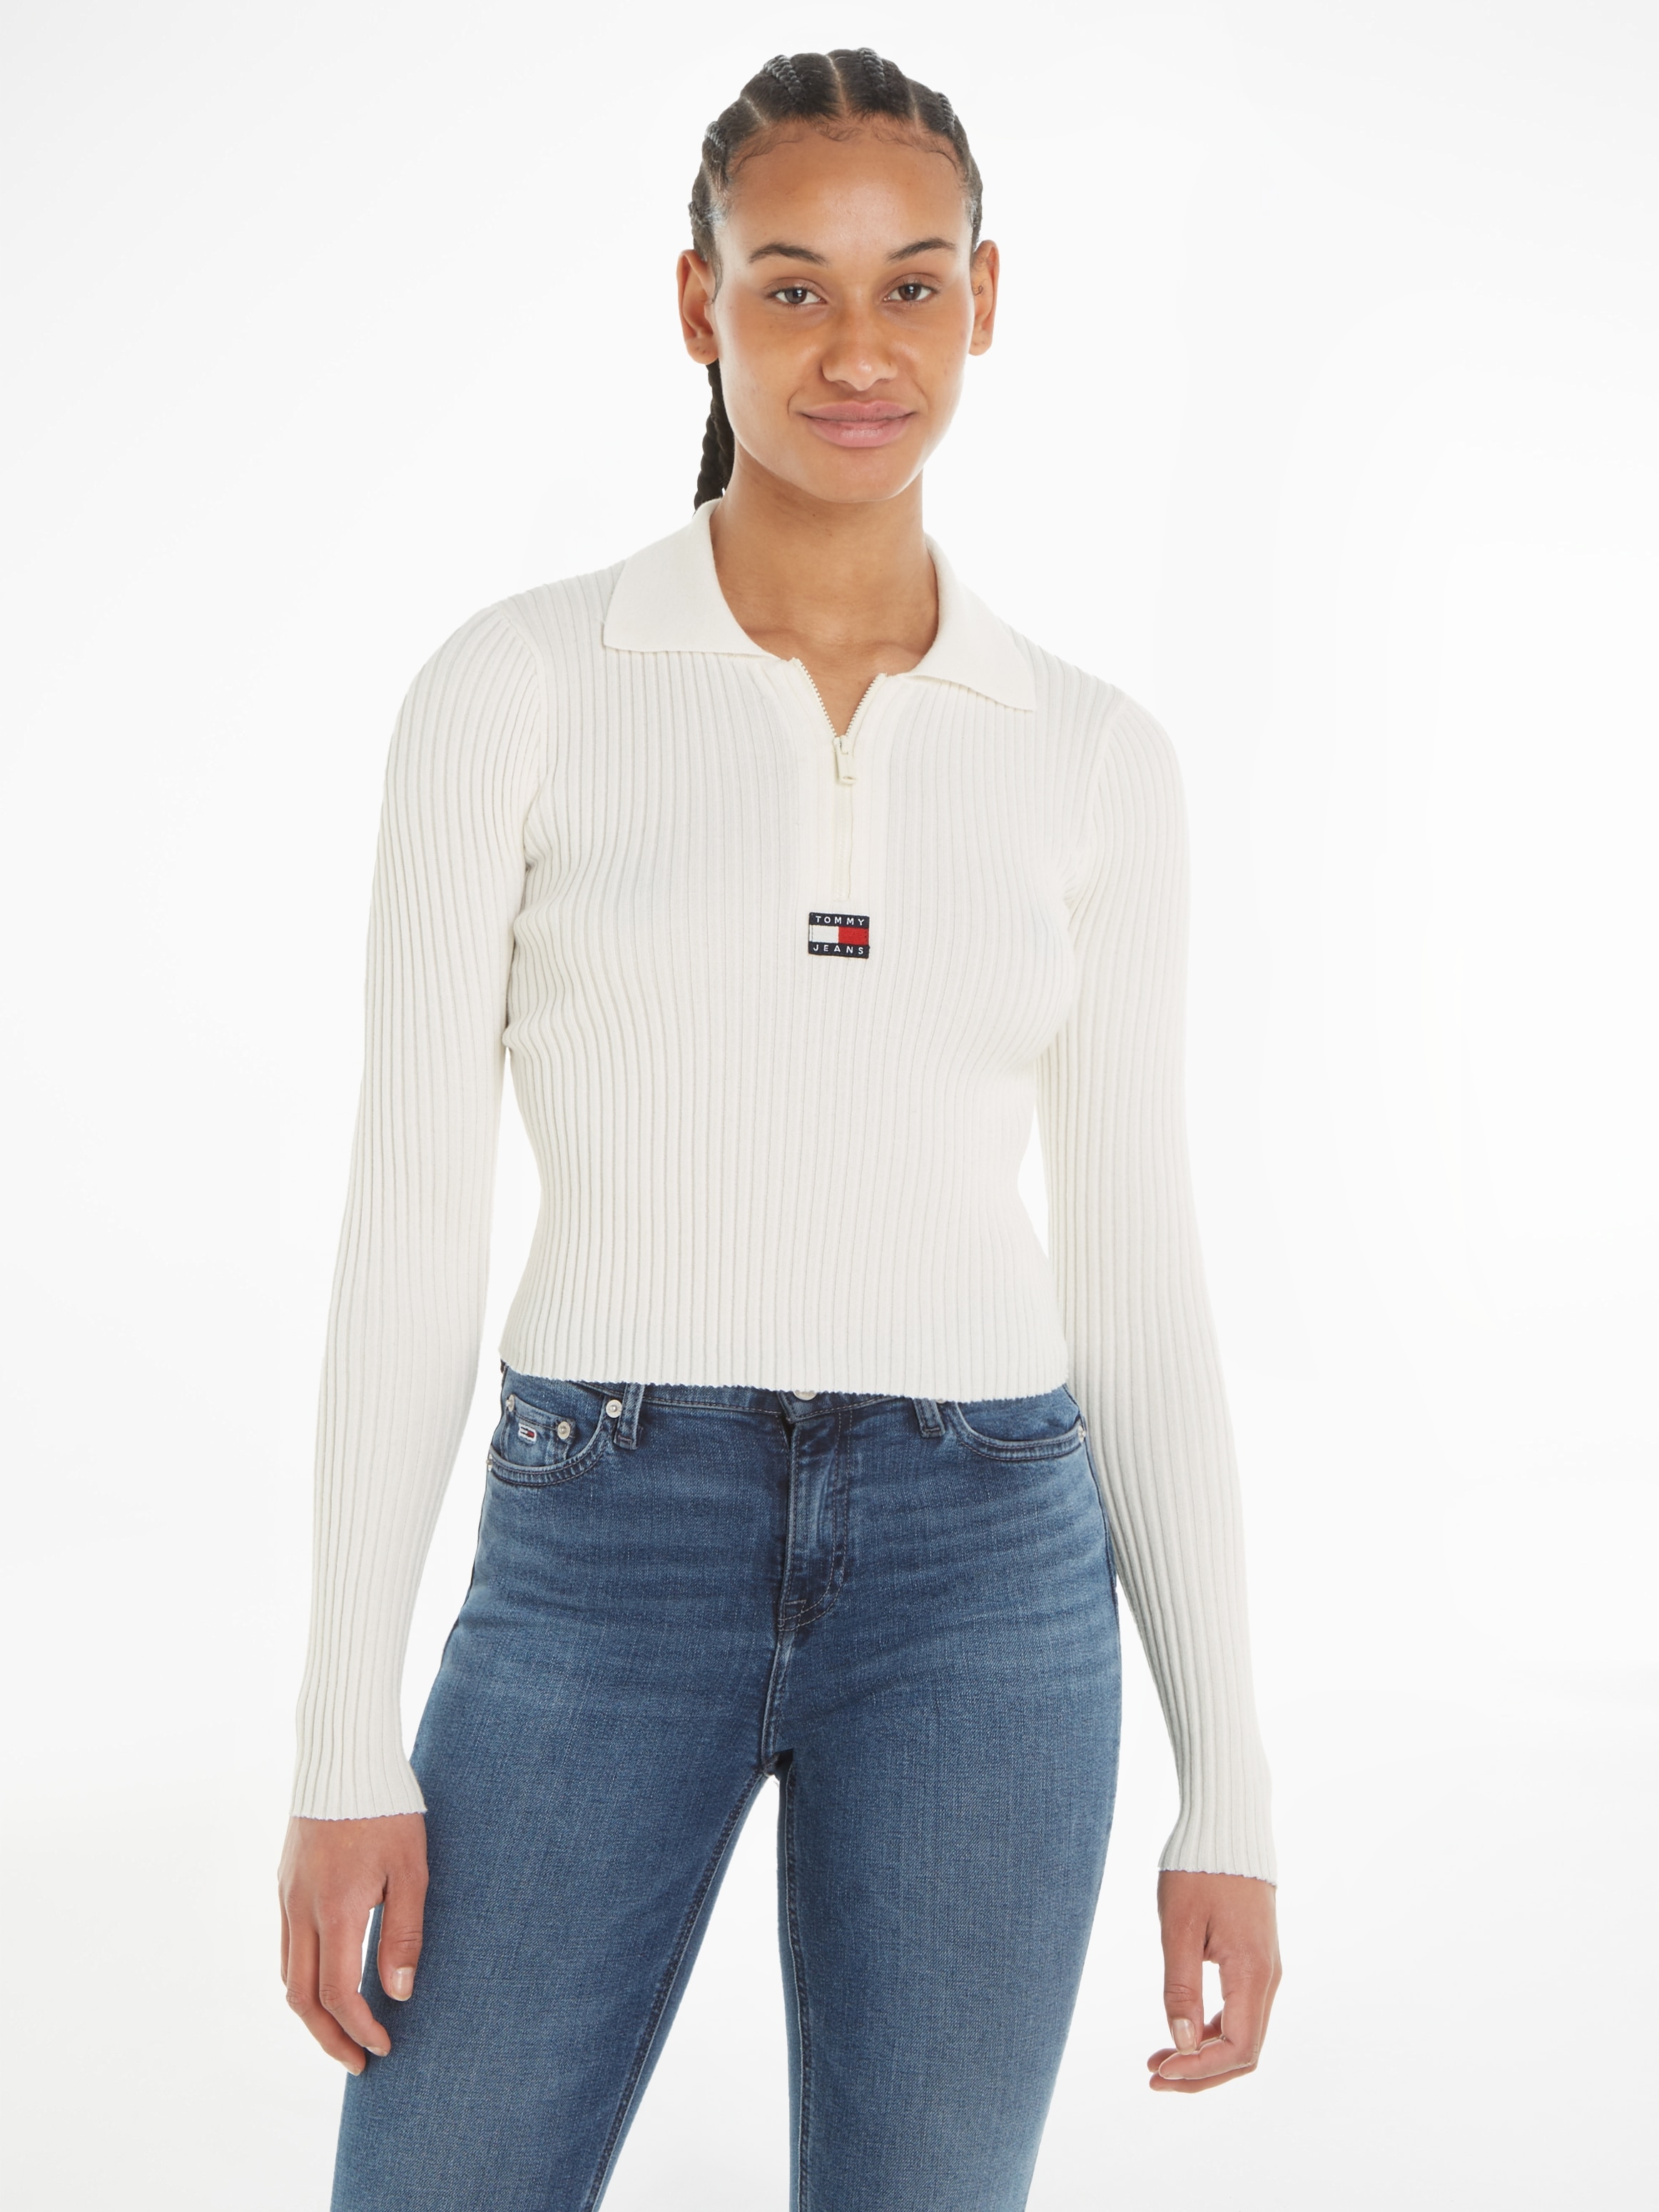 Tommy Jeans Strickpullover, mit Tommy Jeans Markenlabel-Tommy Jeans 1